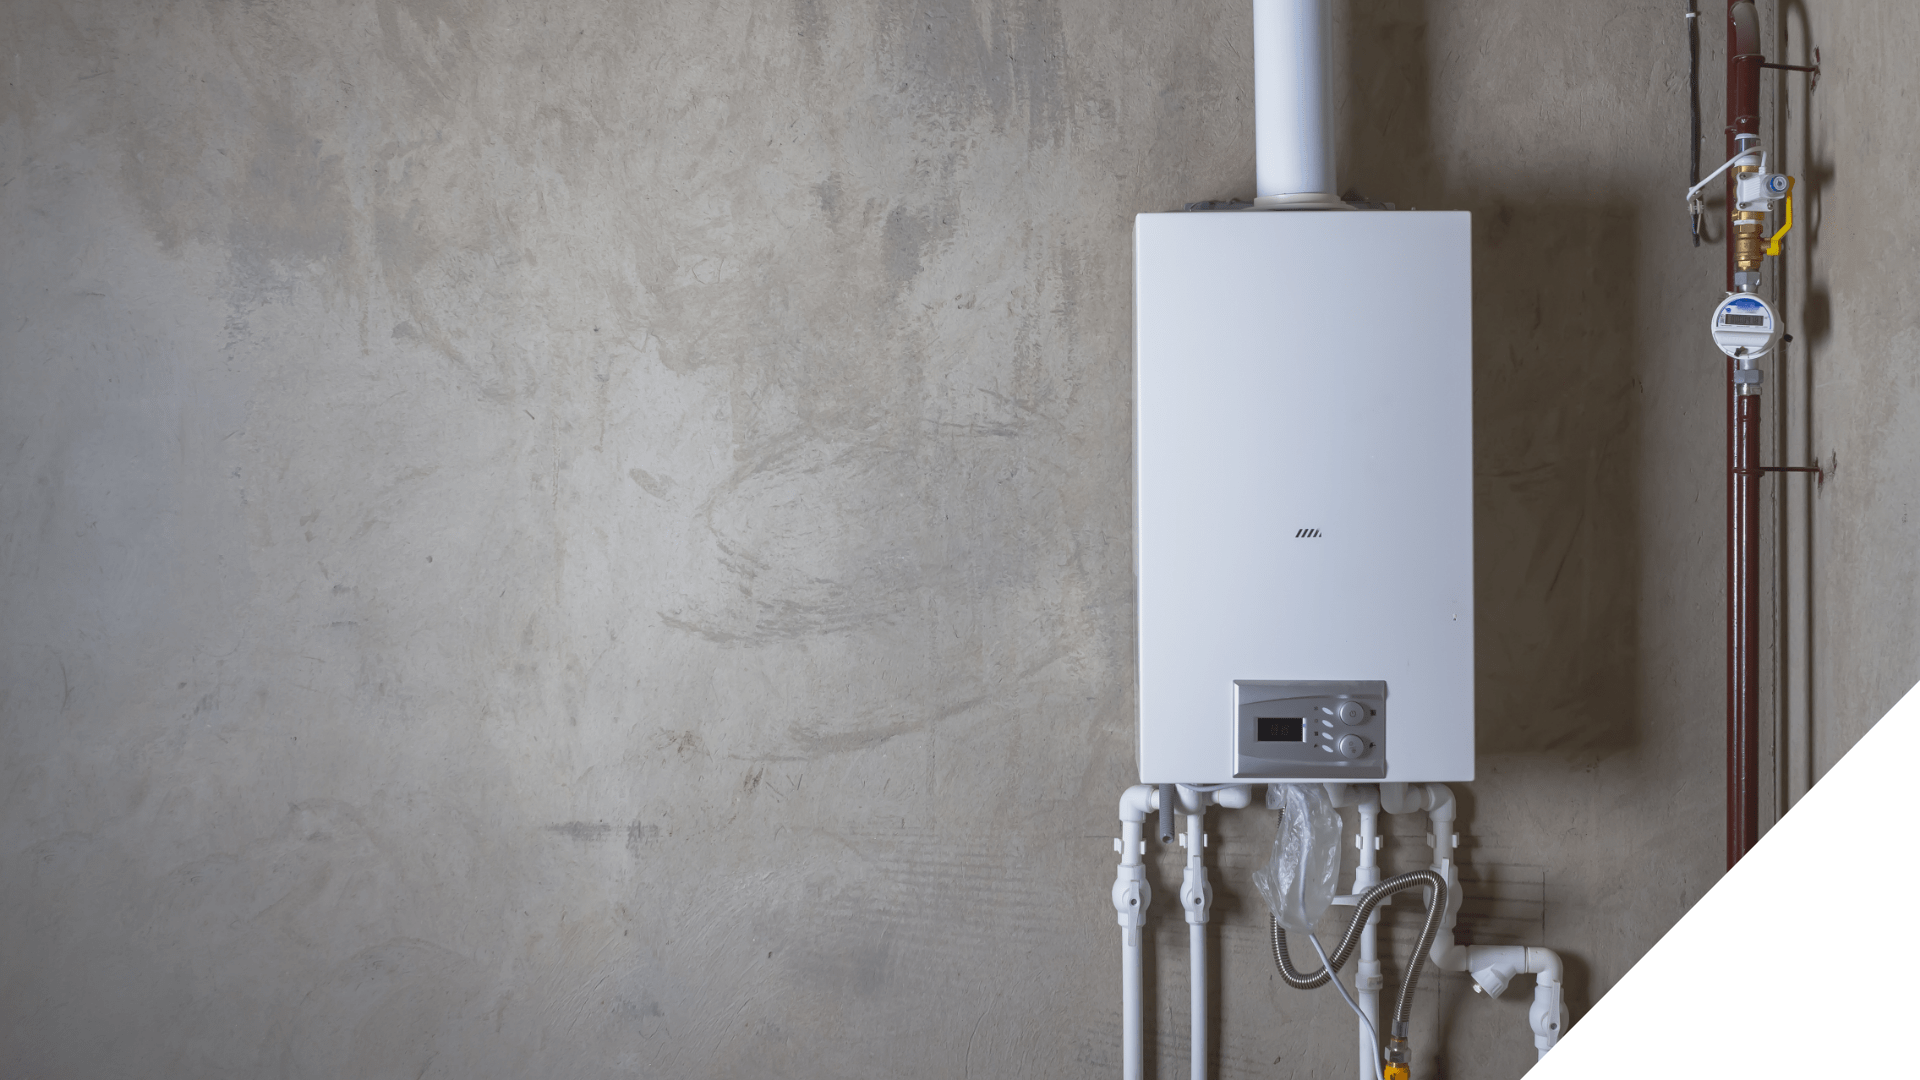 How much does it cost to fit a new central heating system into a house?